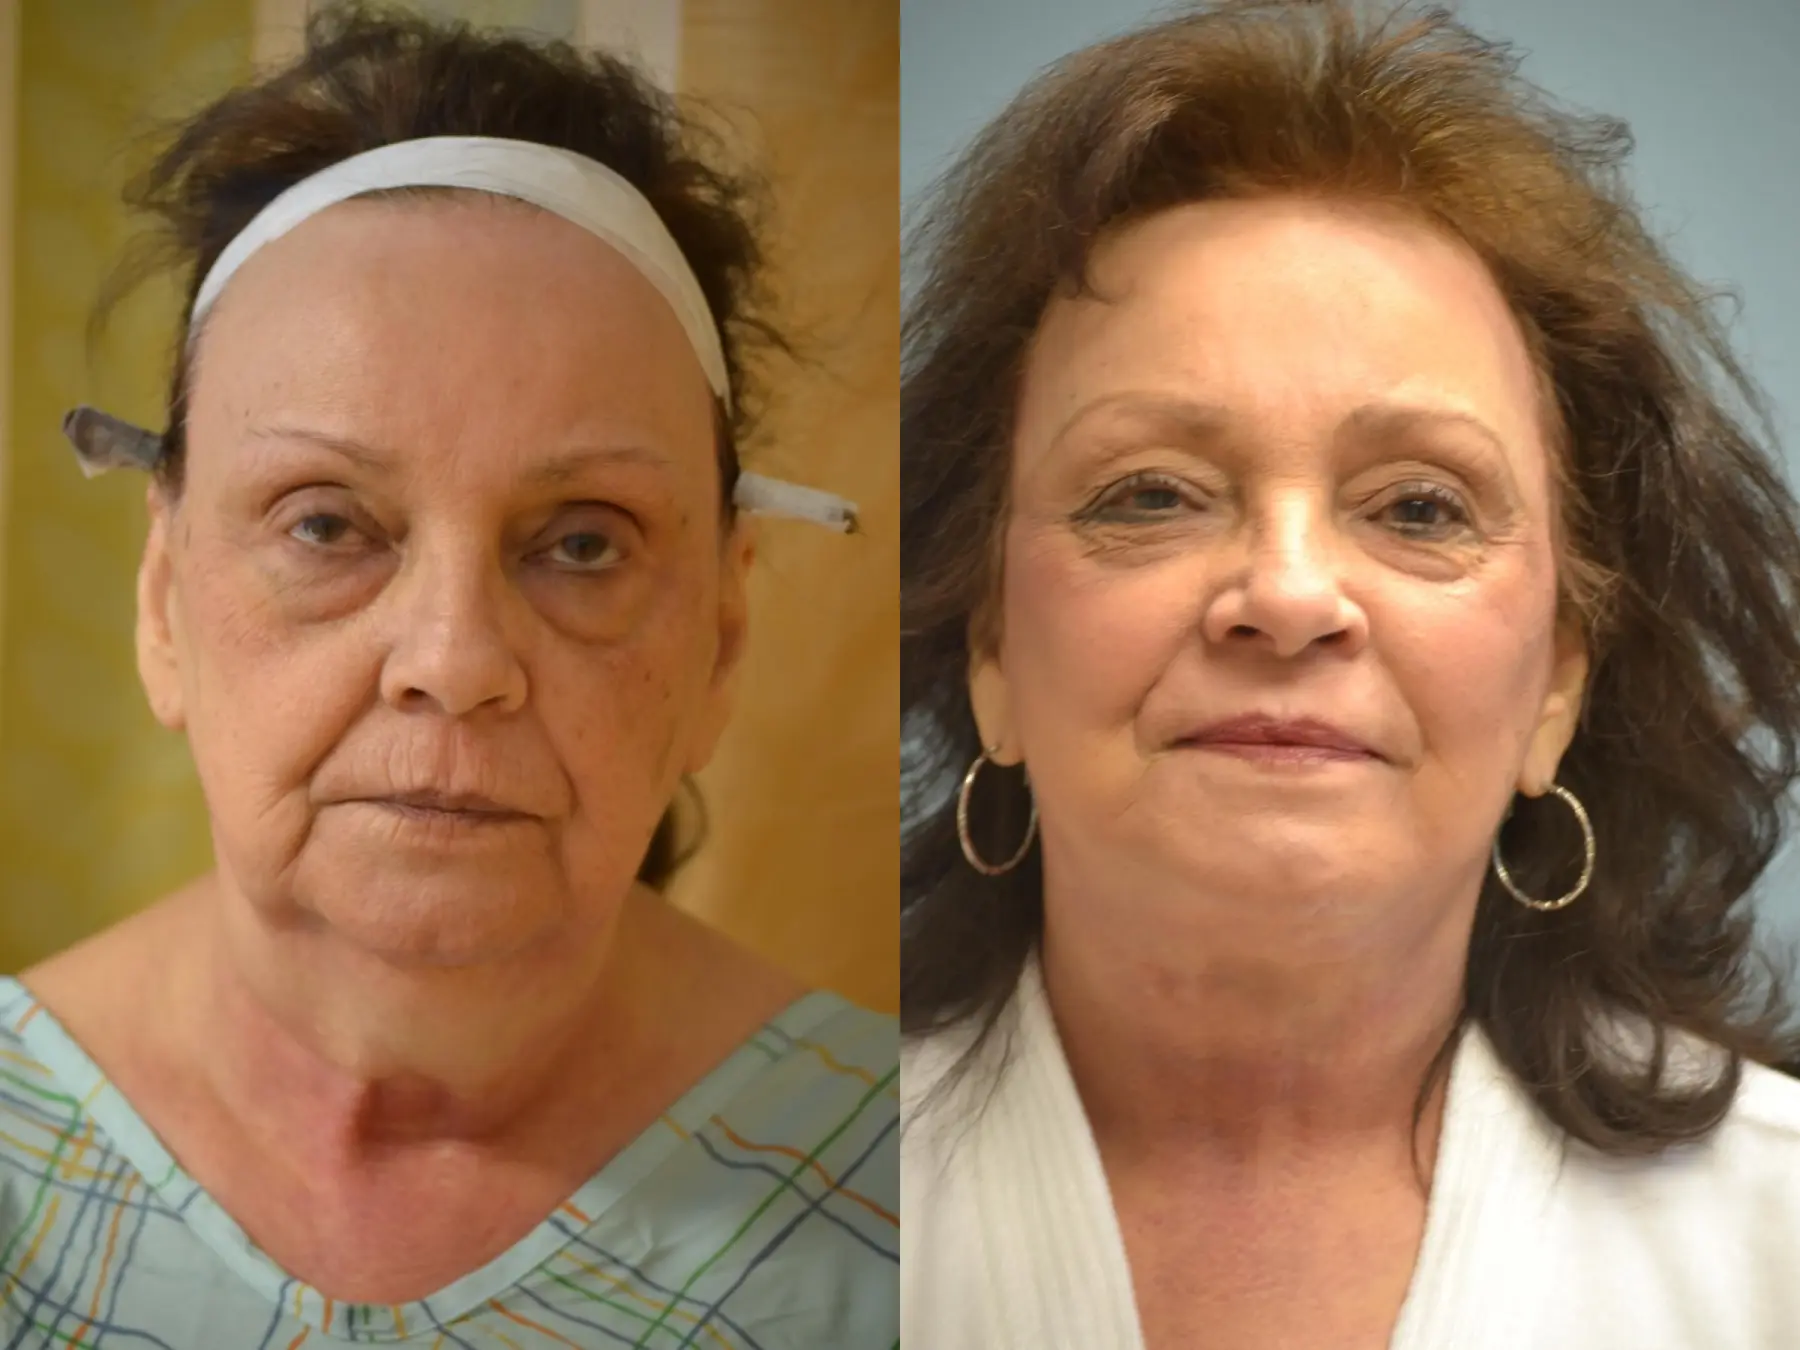 Facelift: Patient 12 - Before and After 1